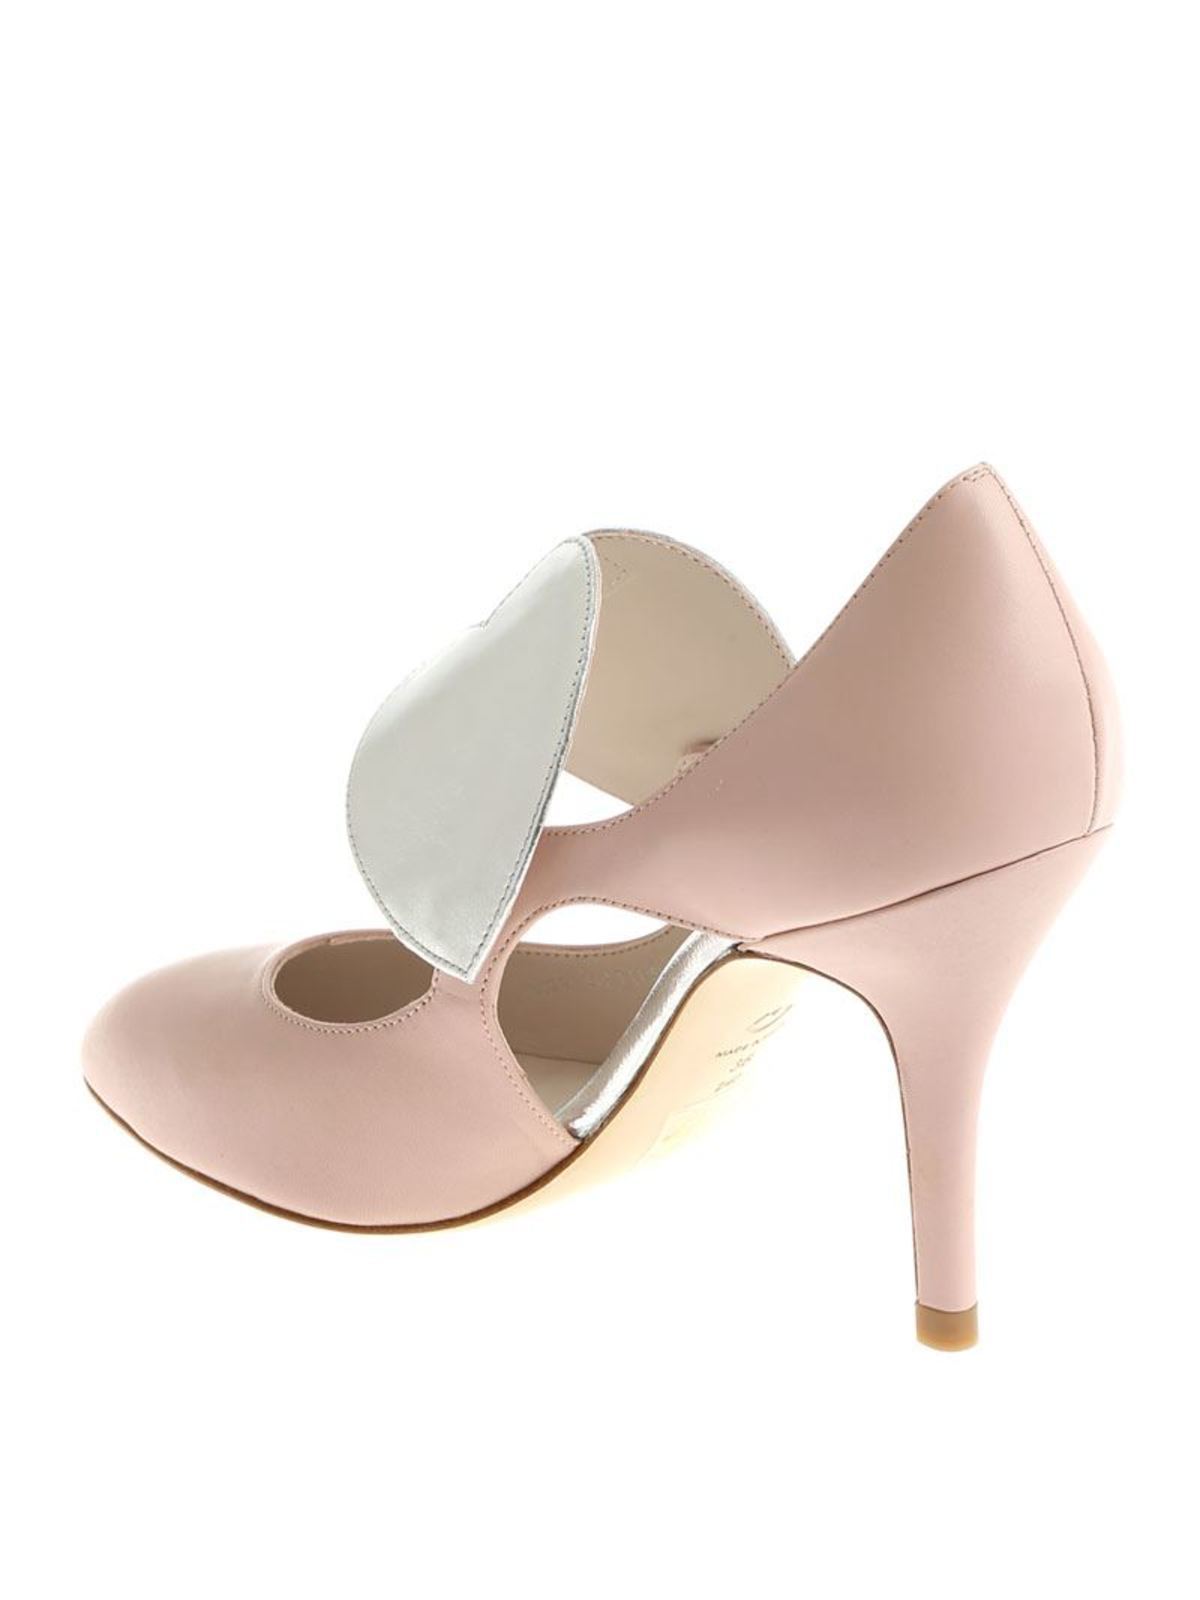 lulu guinness pink shoes